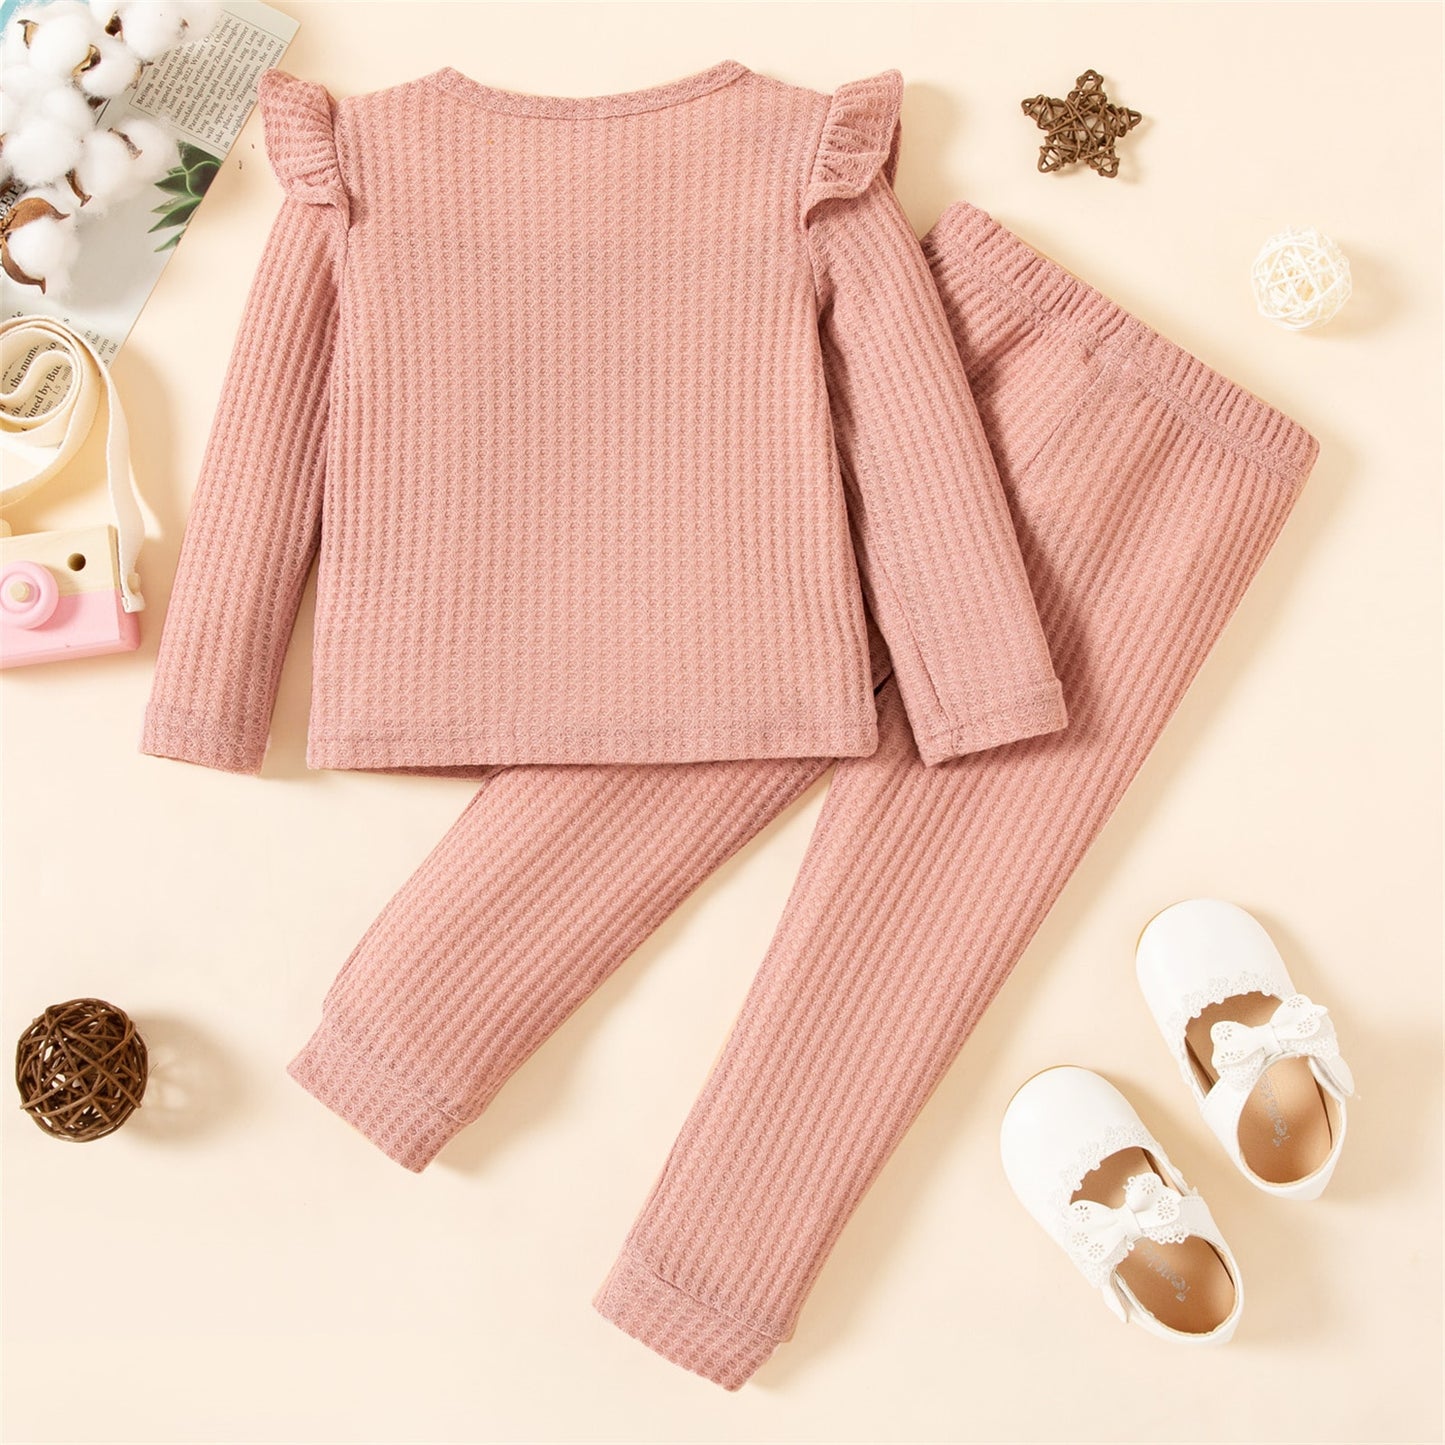 PatPat 2-piece Toddler Girl Ruffled Textured Long-sleeve Top and Solid Color Pants Set